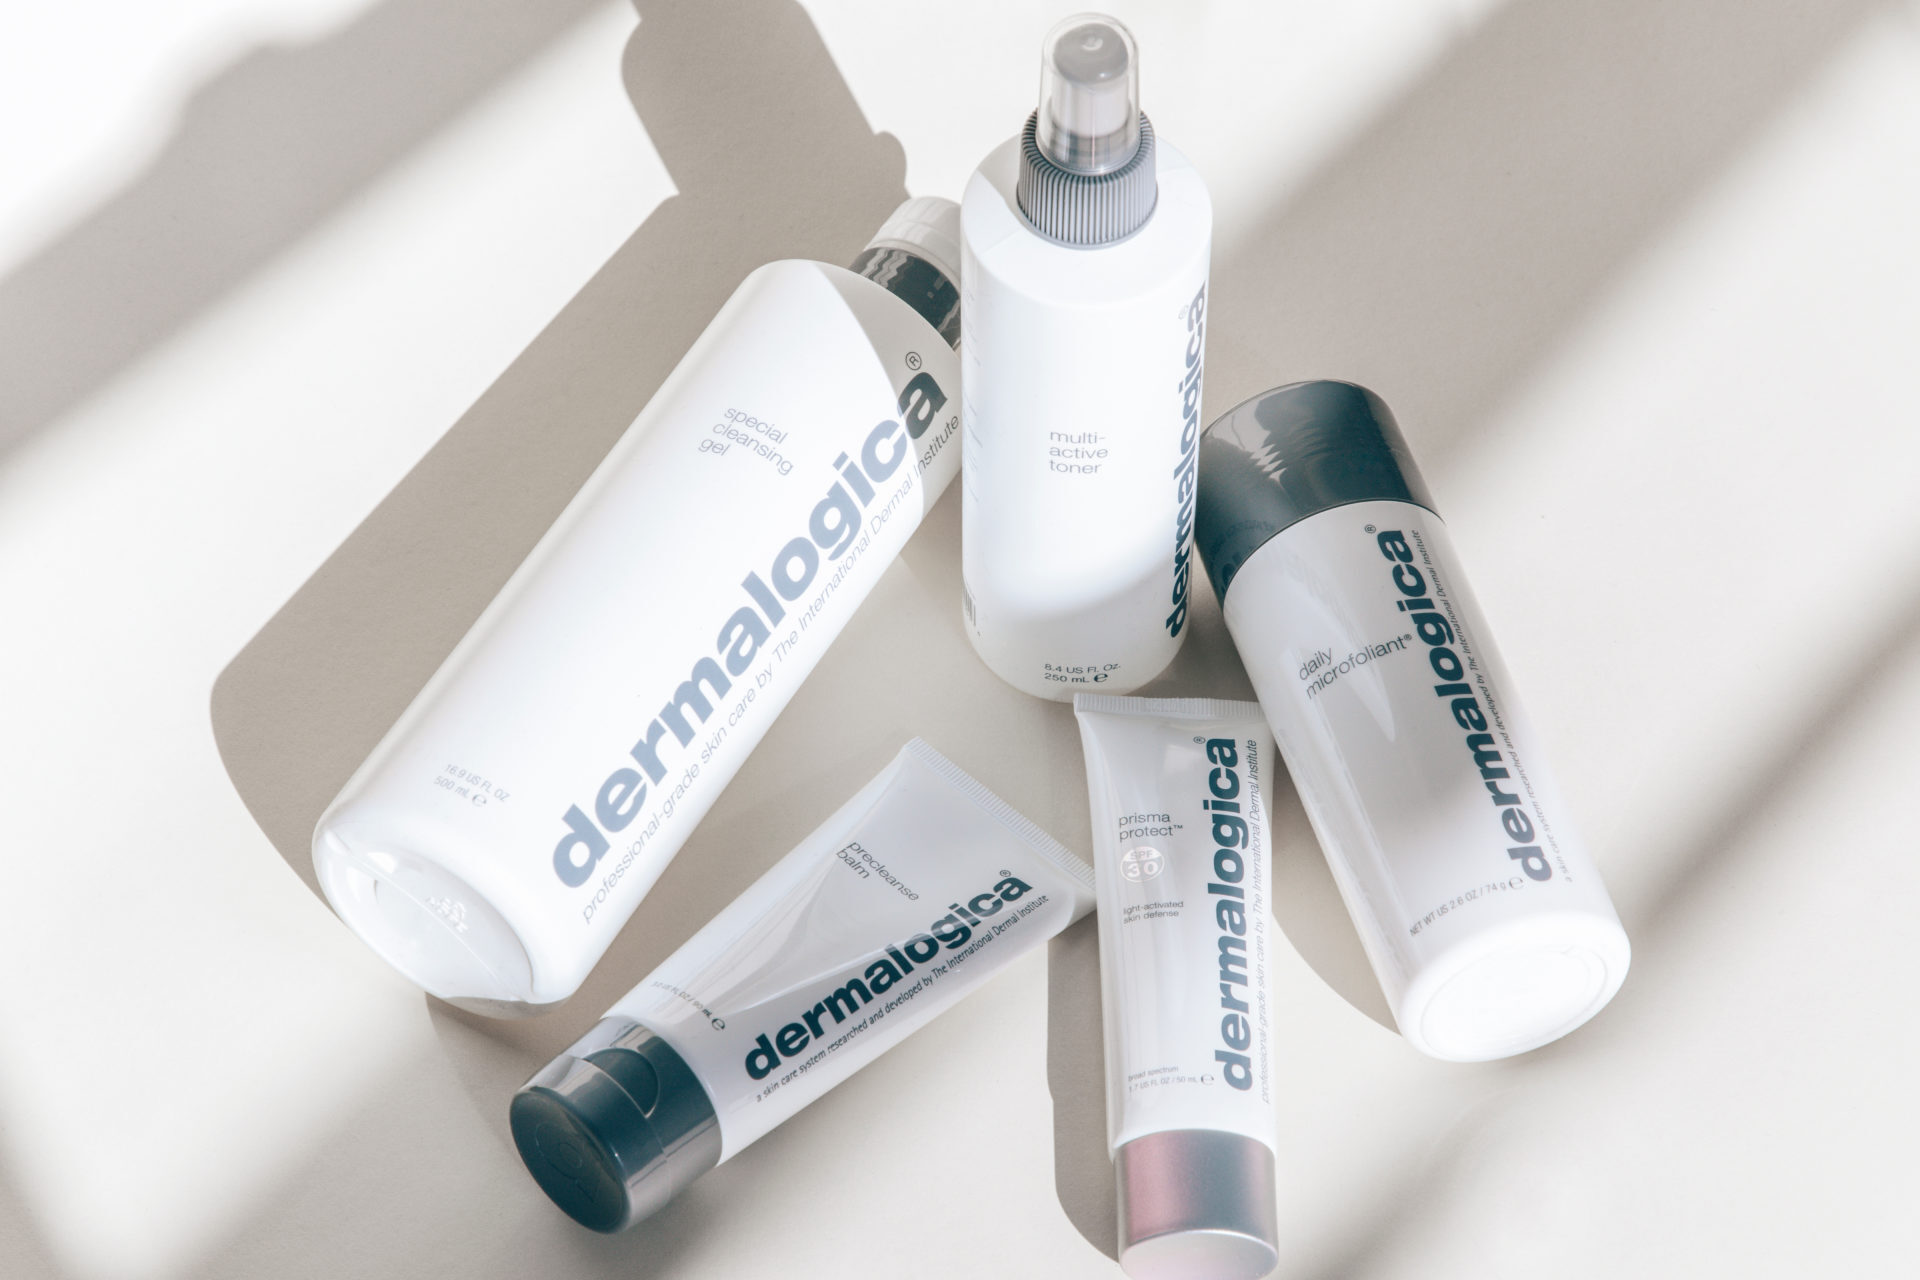 An image of dermalogica